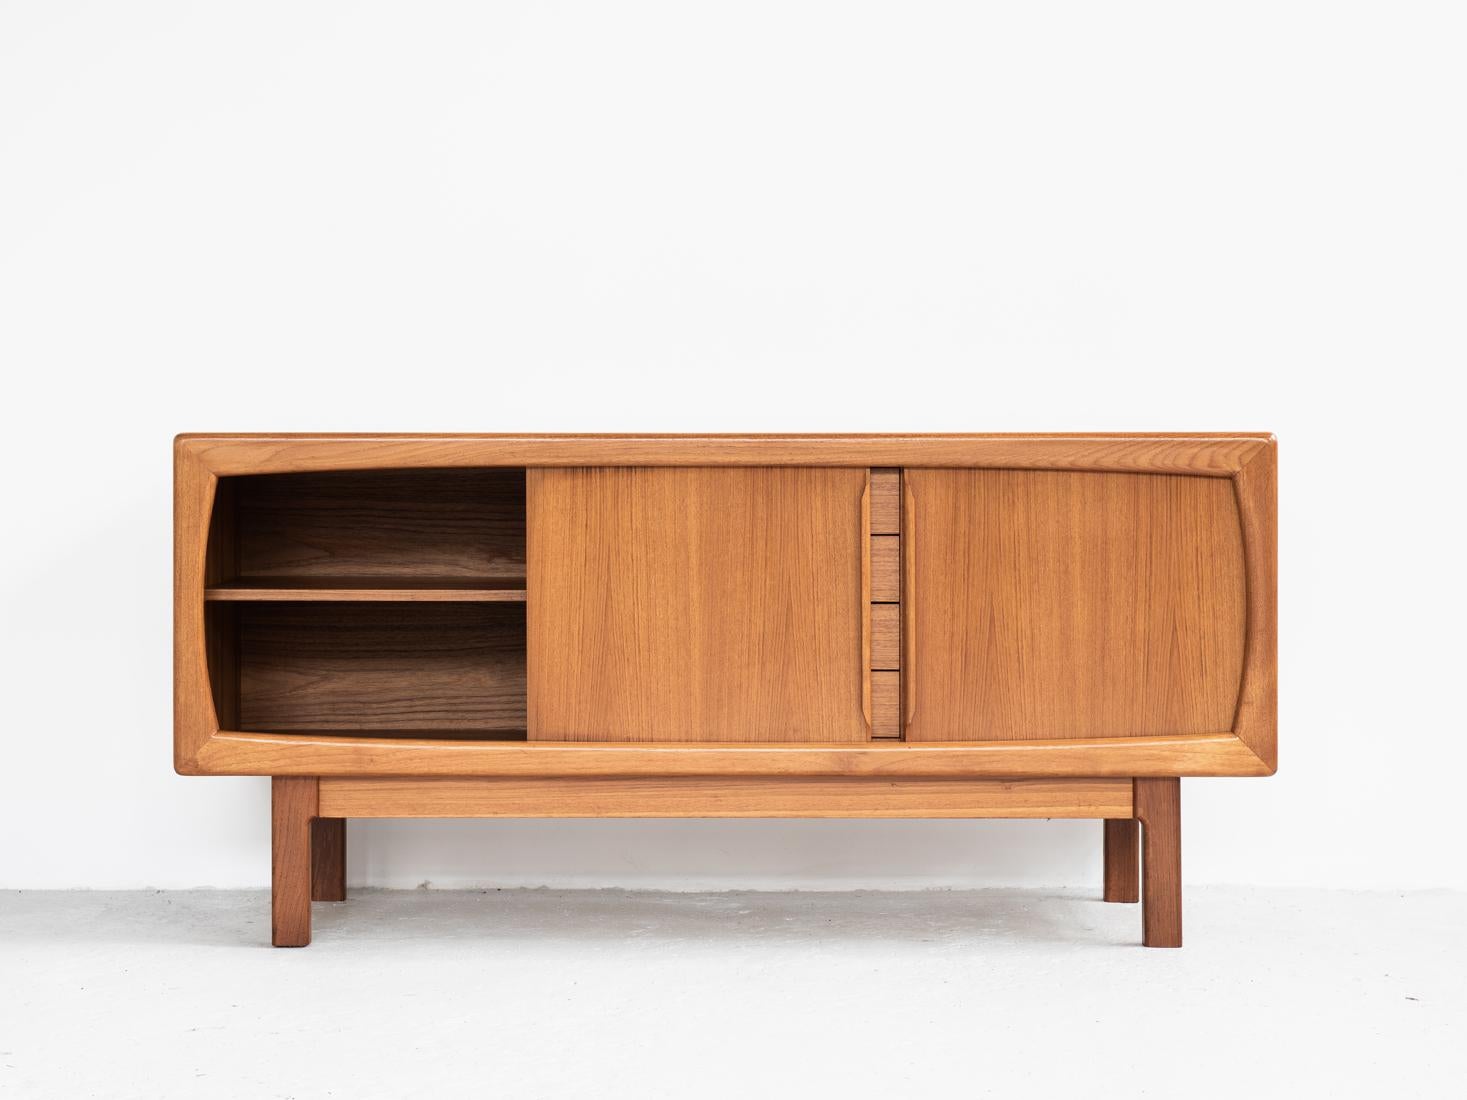 Midcentury sideboard made by Burchardt Nielsen in Denmark in the 1960s. It is the smaller model. The drawers are in the style of Arne Vodder. This sideboard is often attributed to HP Hansen or Dyrlund, but we know it has been made by Burchardt